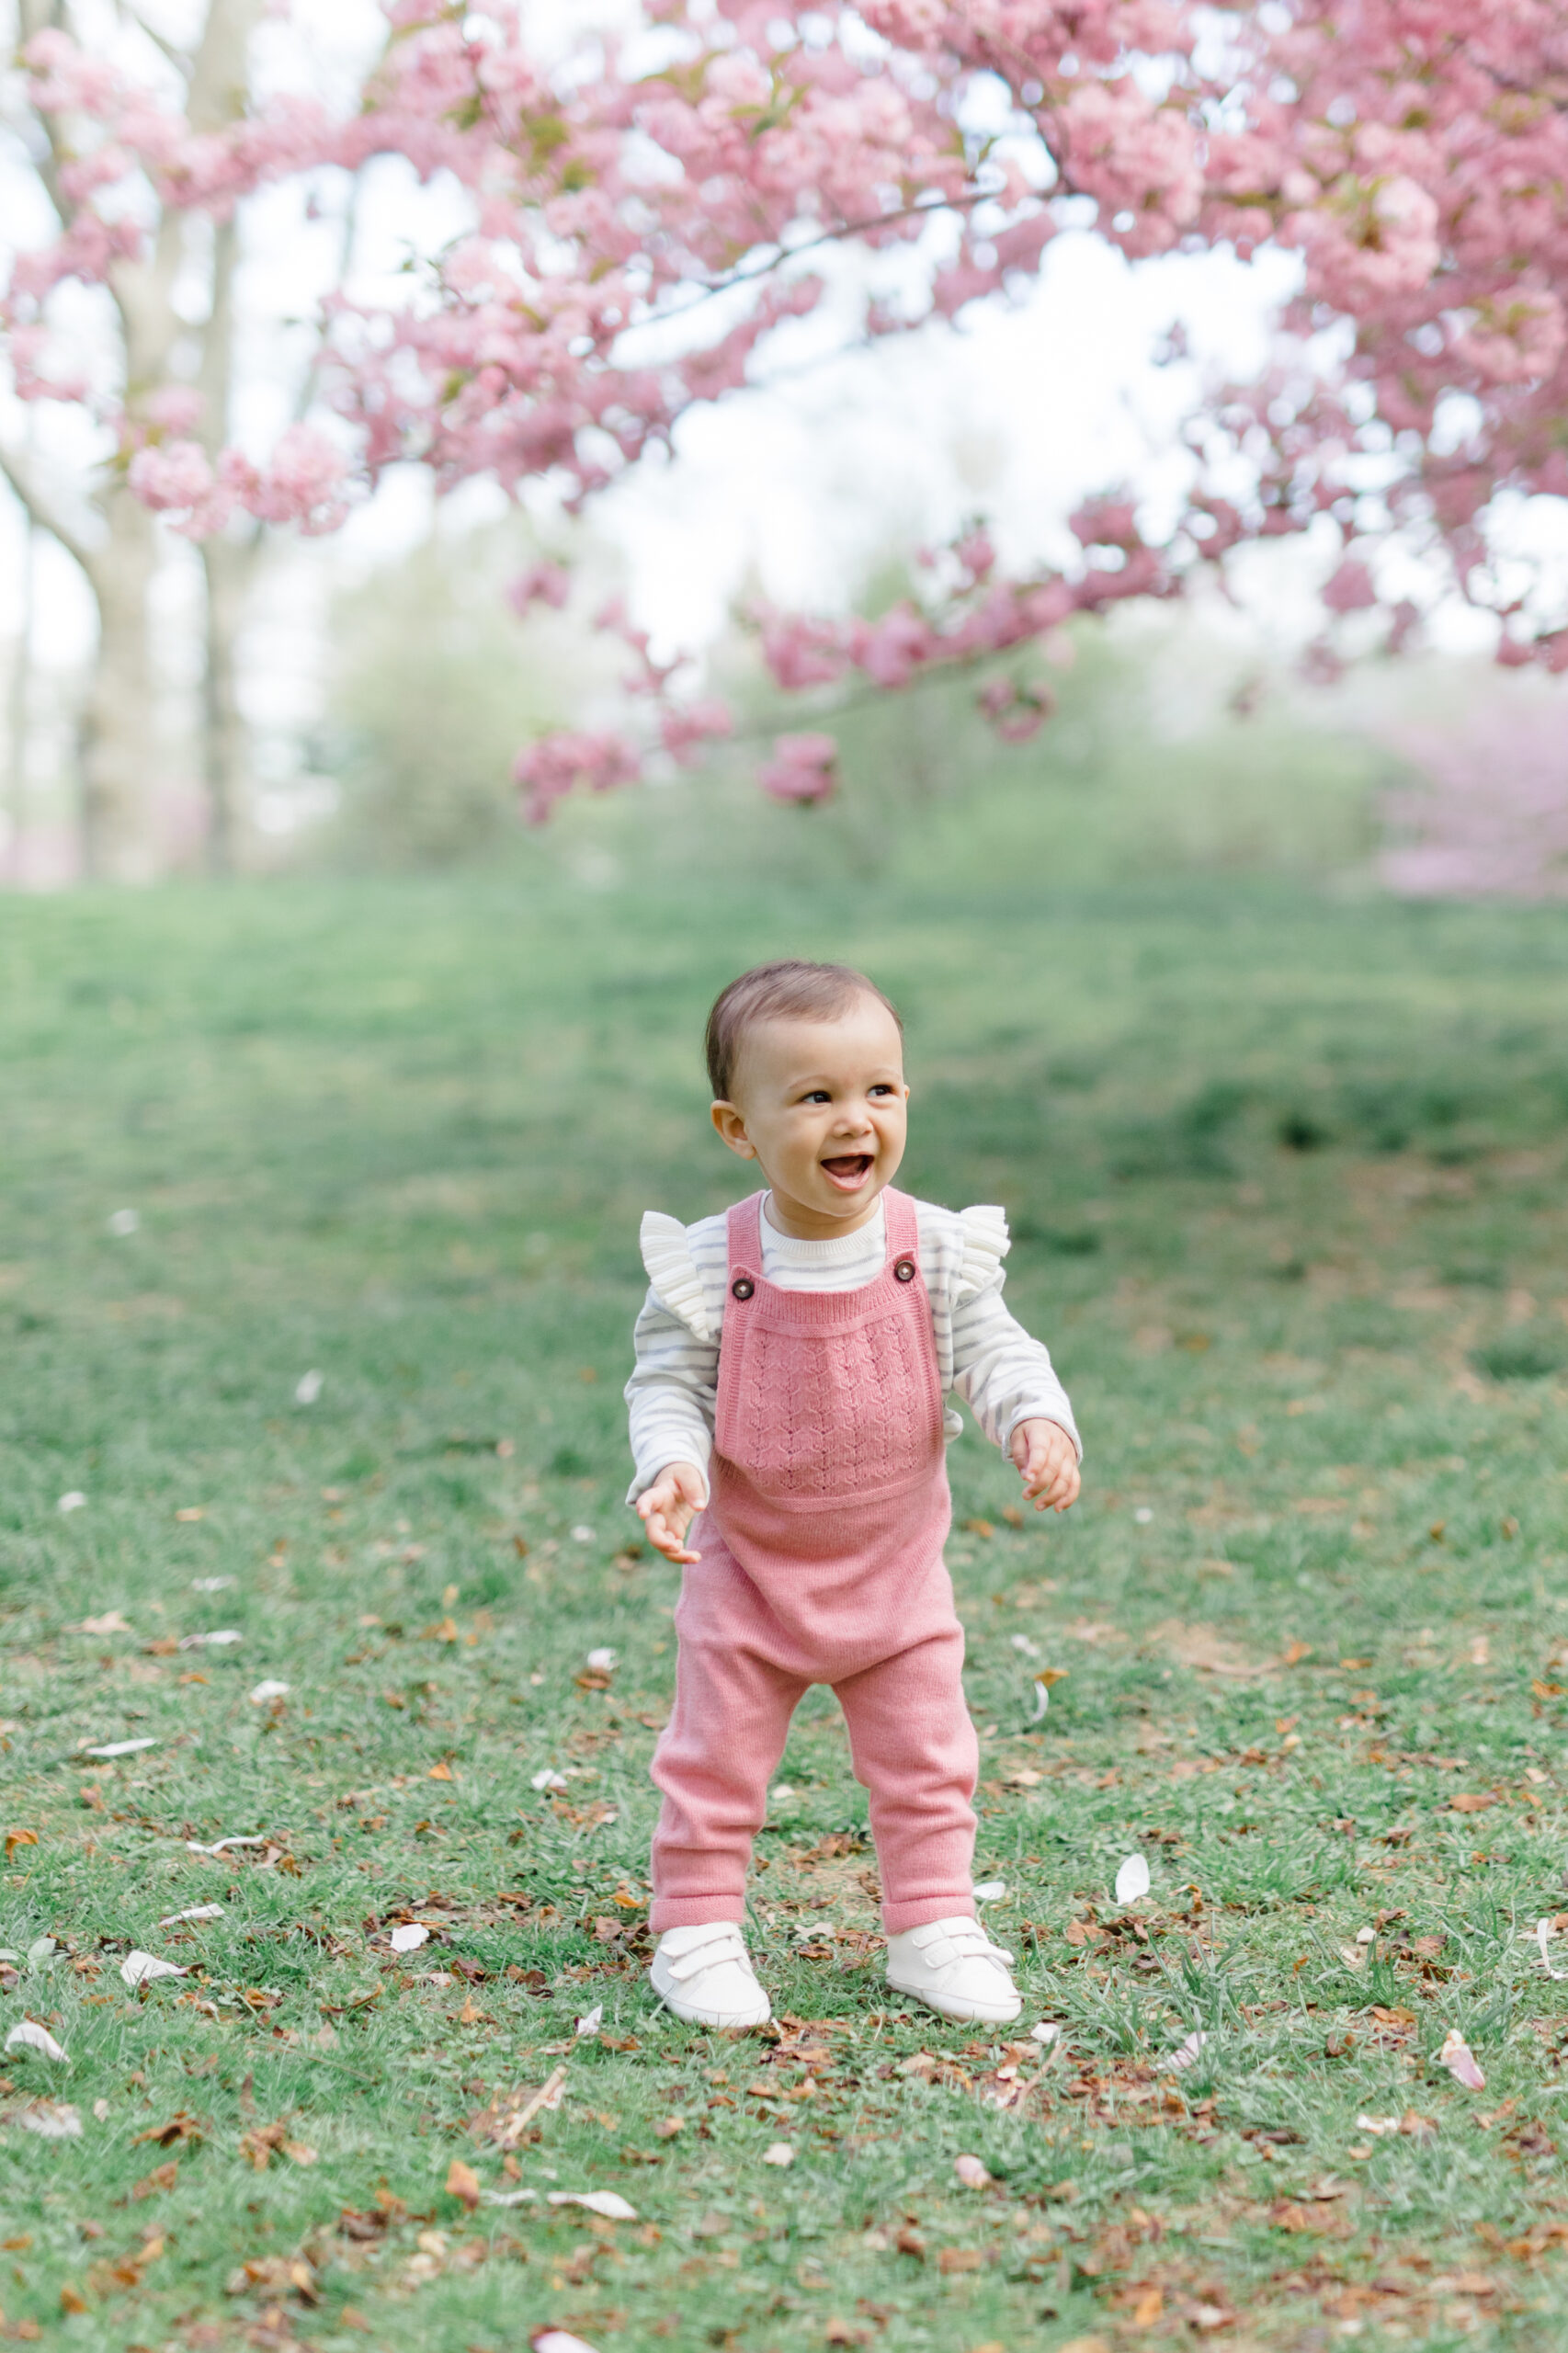 A little girl walks in front of the cherry blossoms in Central Park at a spring mini session shot by Jacqueline Clair Photography